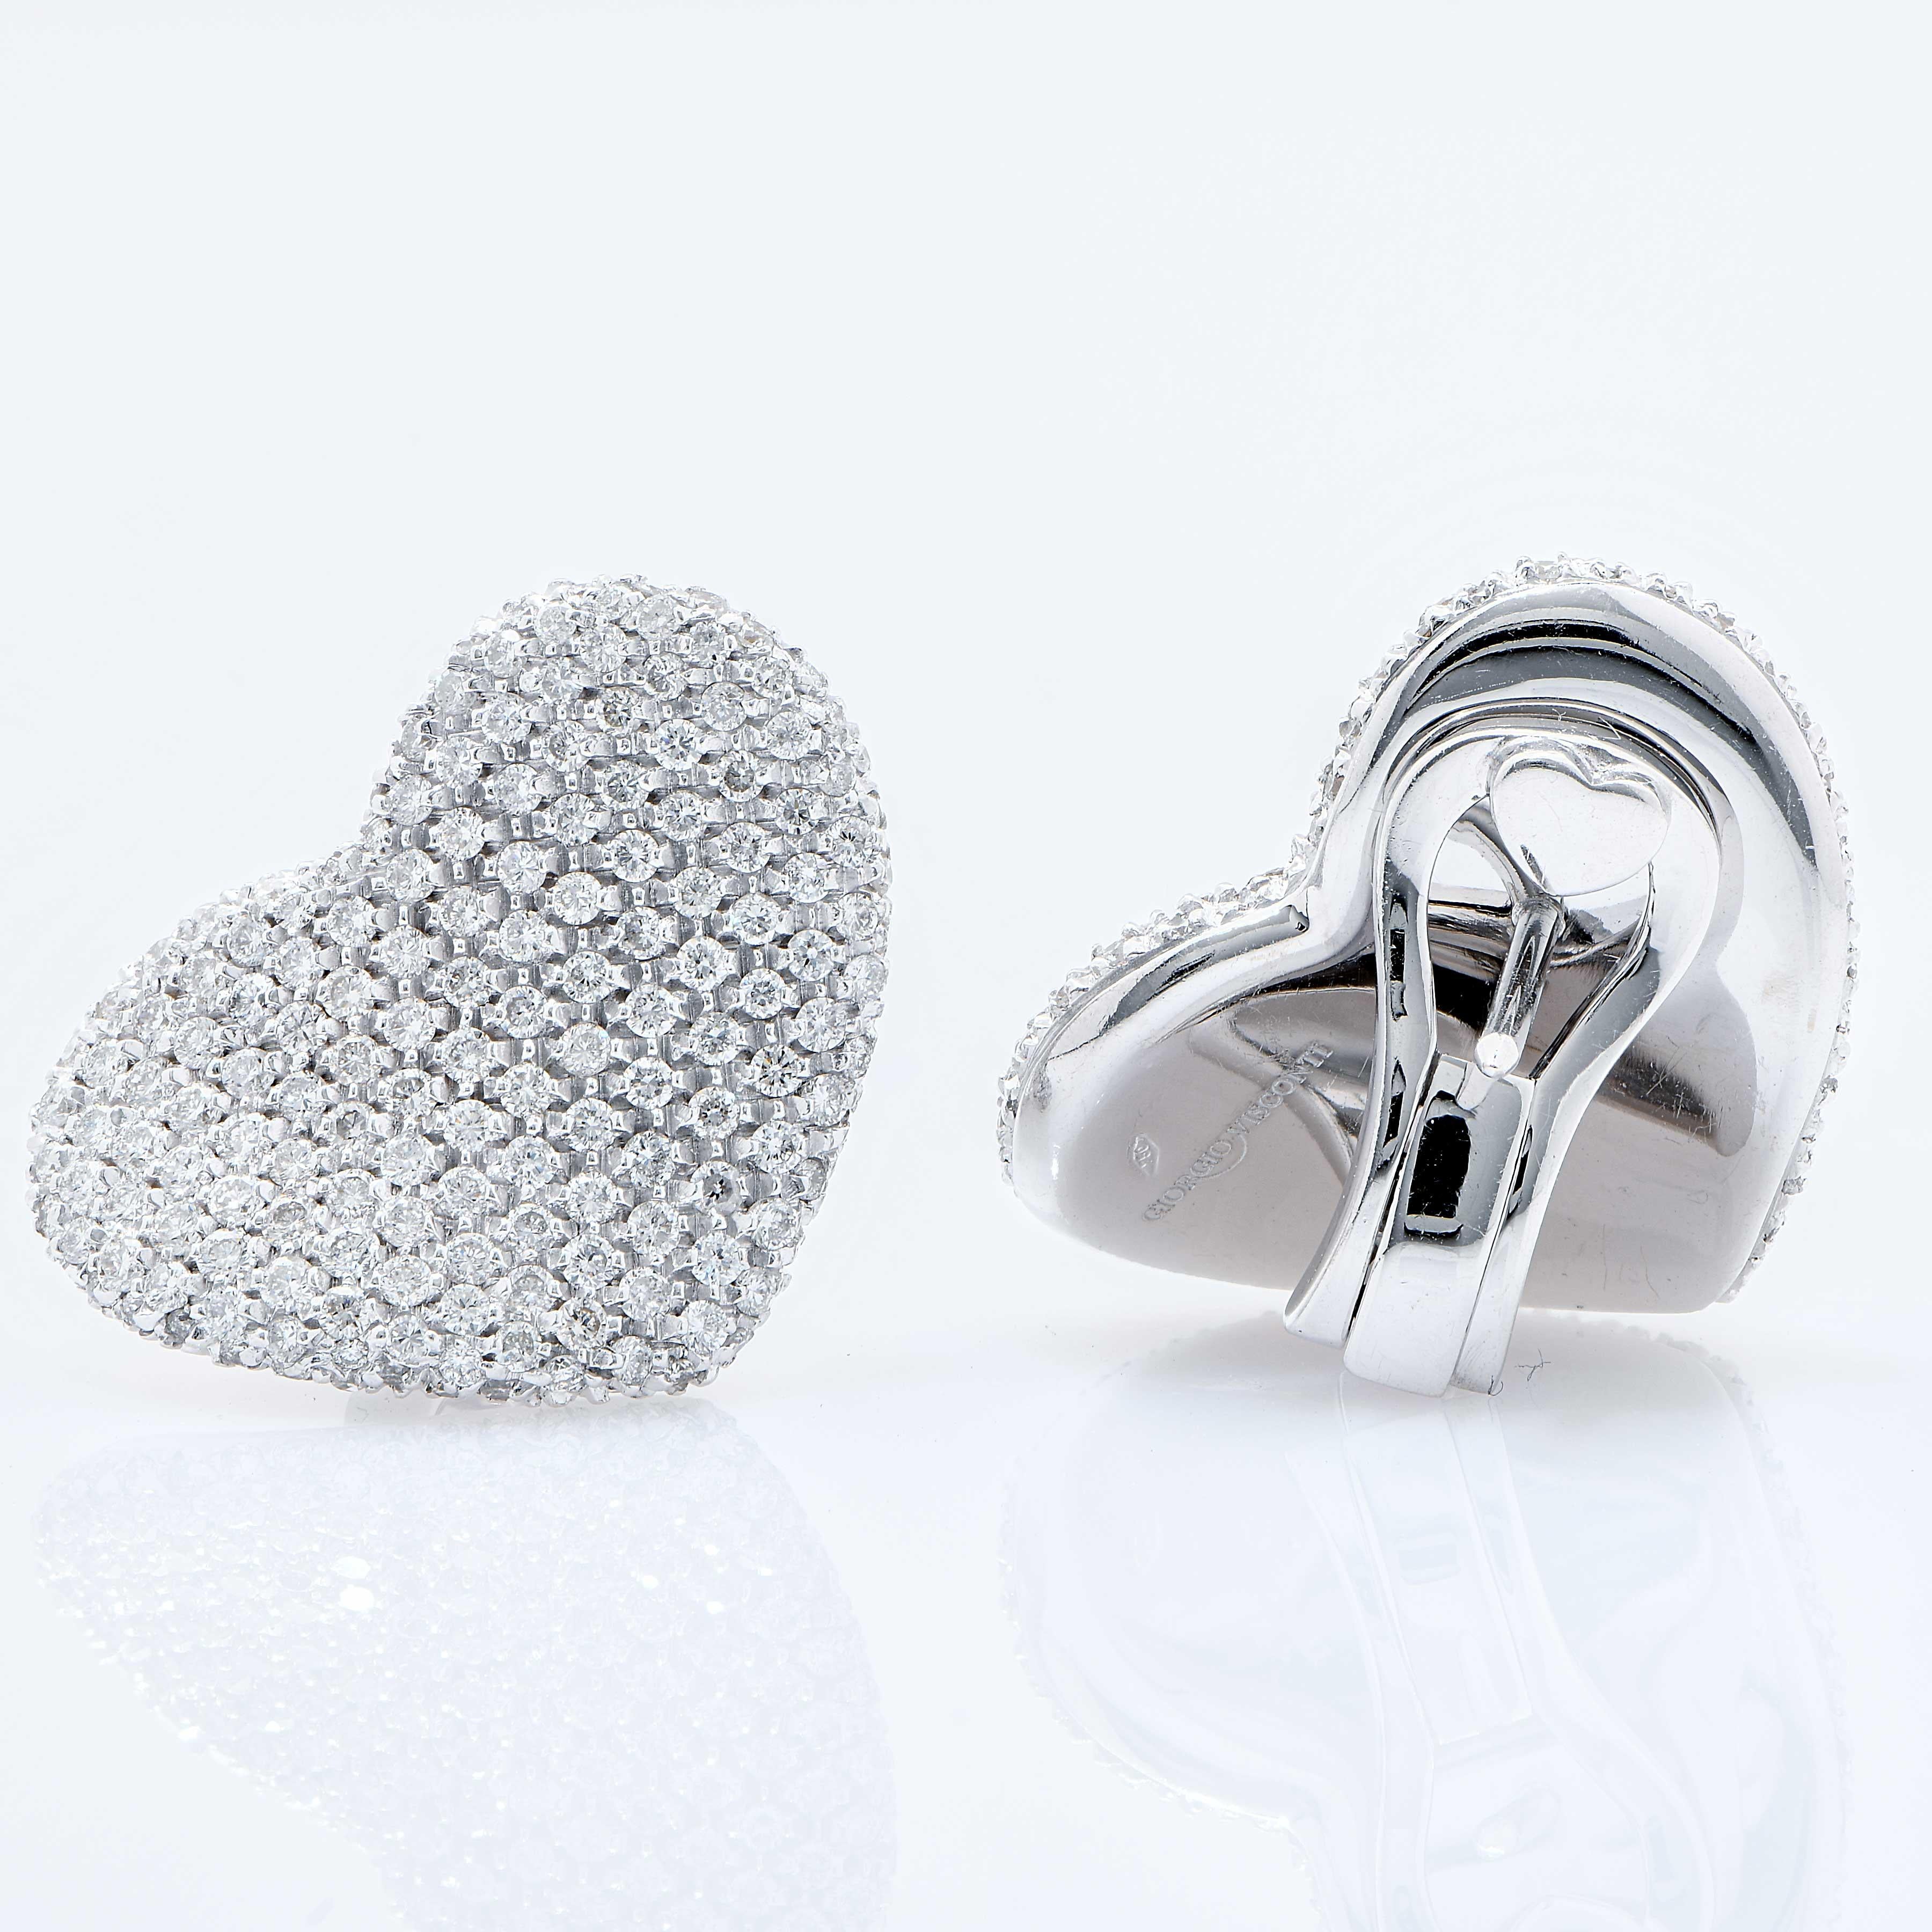 Giorgio Visconti 2.35 Carat Diamond Heart Shaped 18 Karat White Gold Earrings featuring approximately 300 prong set round brilliant cut diamonds G color VS clarity.
Metal Type: 18 Karat White Gold
Metal Weight: 19.5 Grams